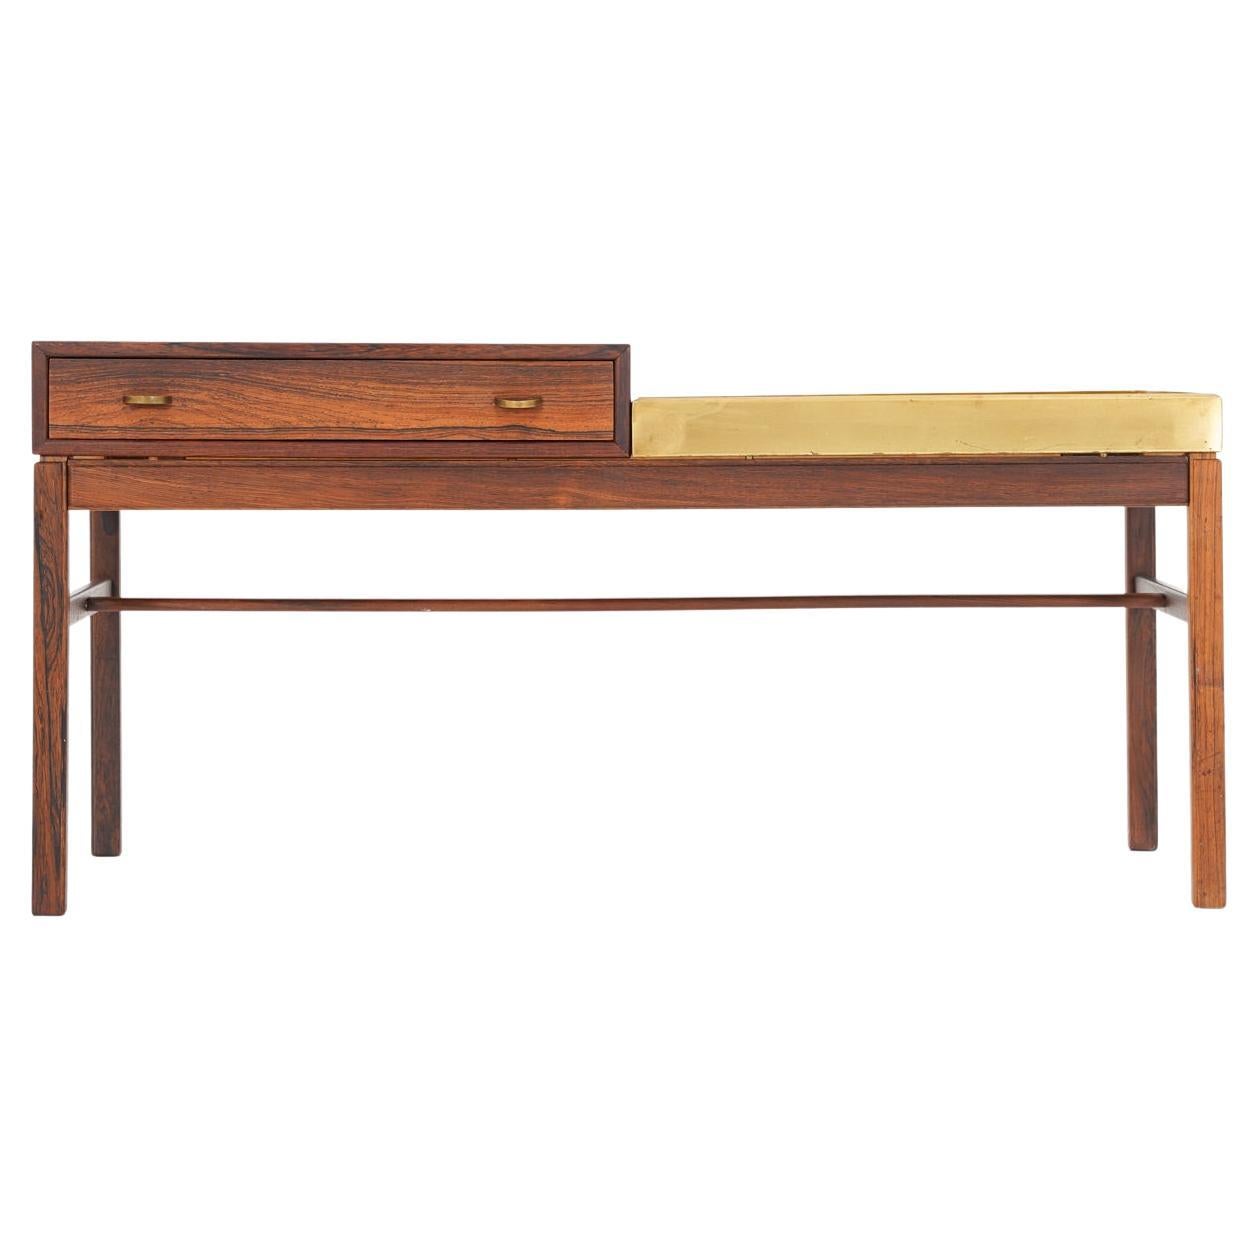 Scandinavian Flower Table "Casino" in Rosewood and Brass by Engström & Myrstrand